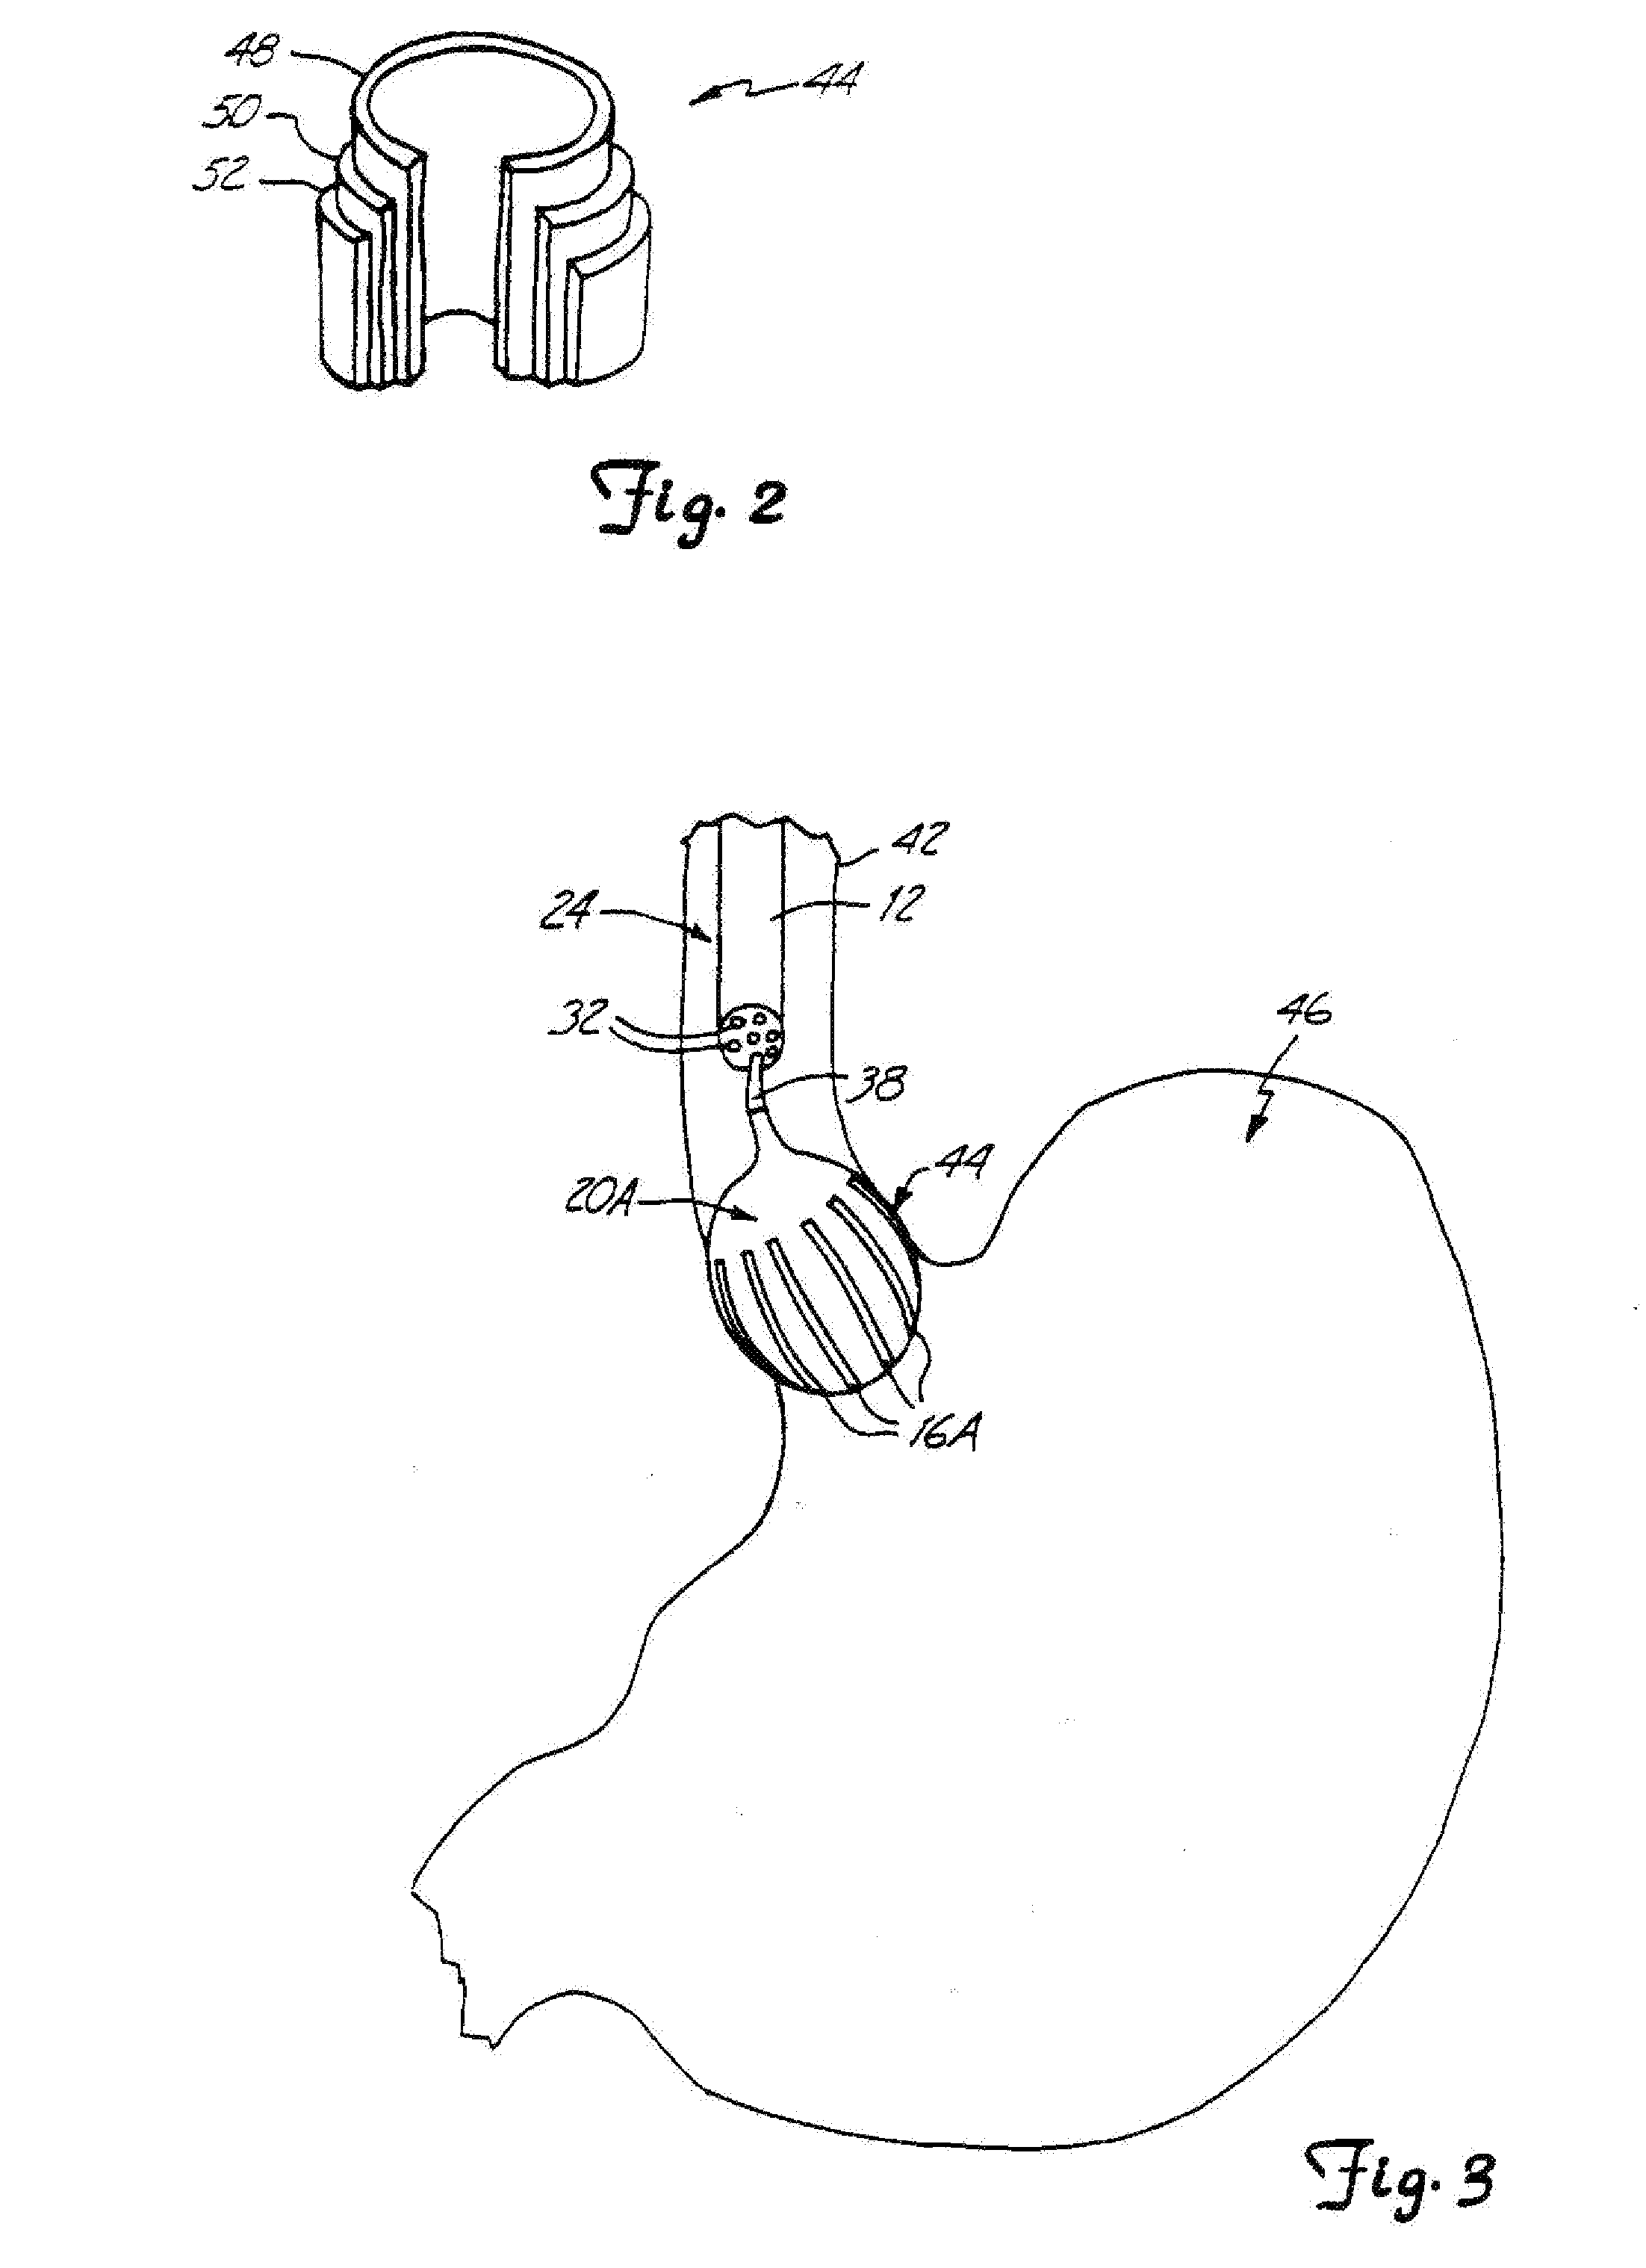 Device and method for treatment of gastroesophageal reflux disease